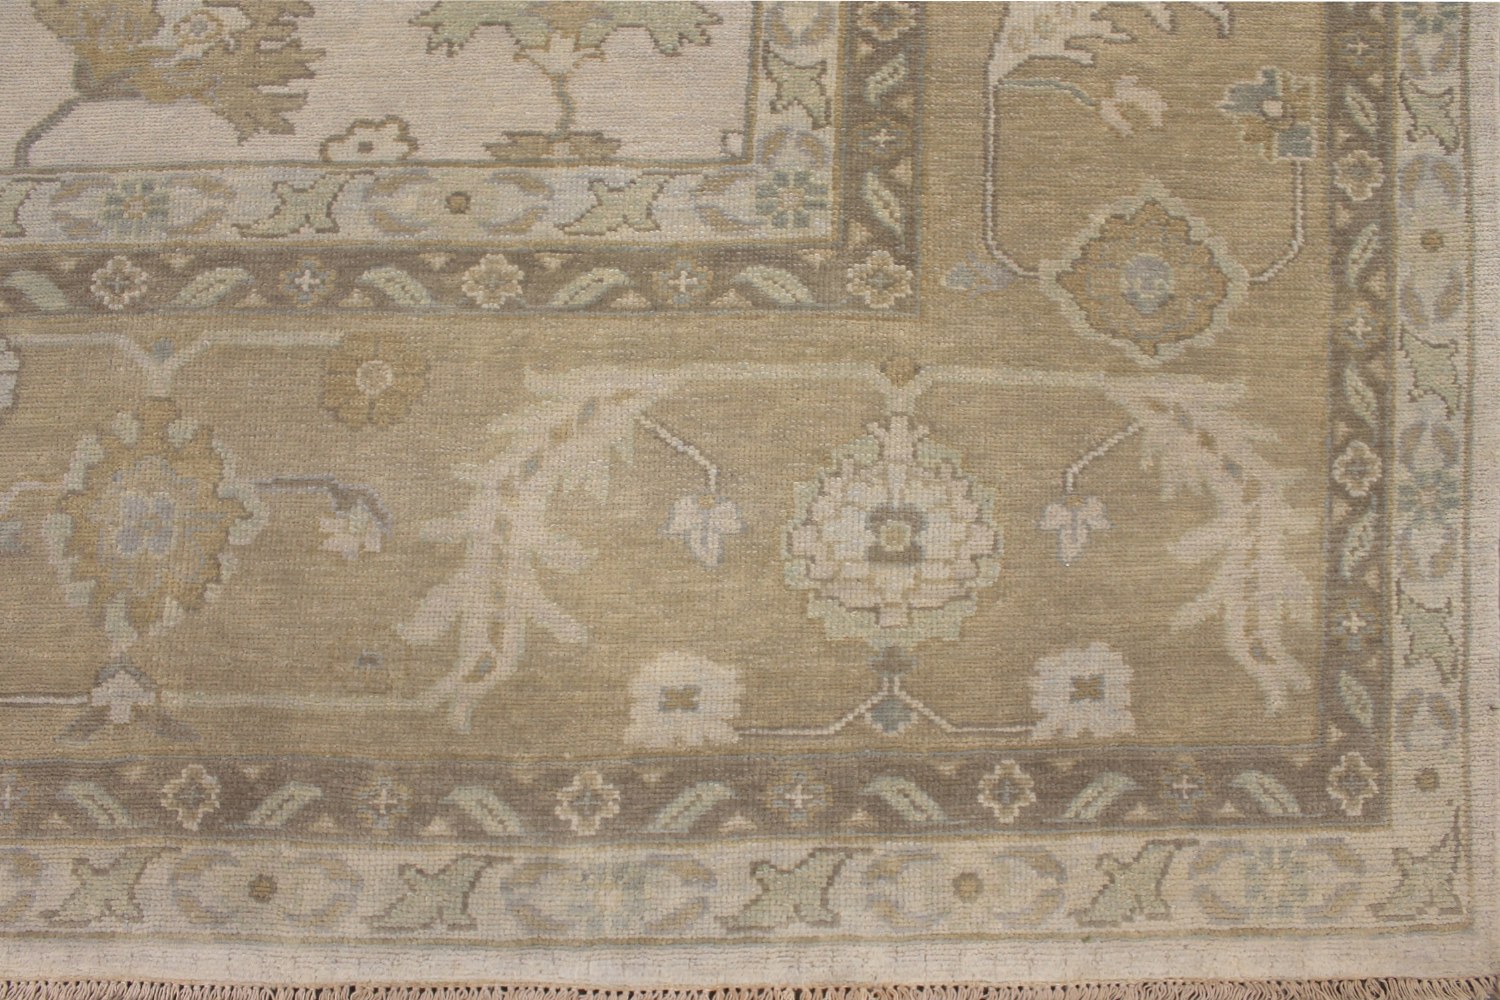 OVERSIZE Oushak Hand Knotted Wool Area Rug - MR027763